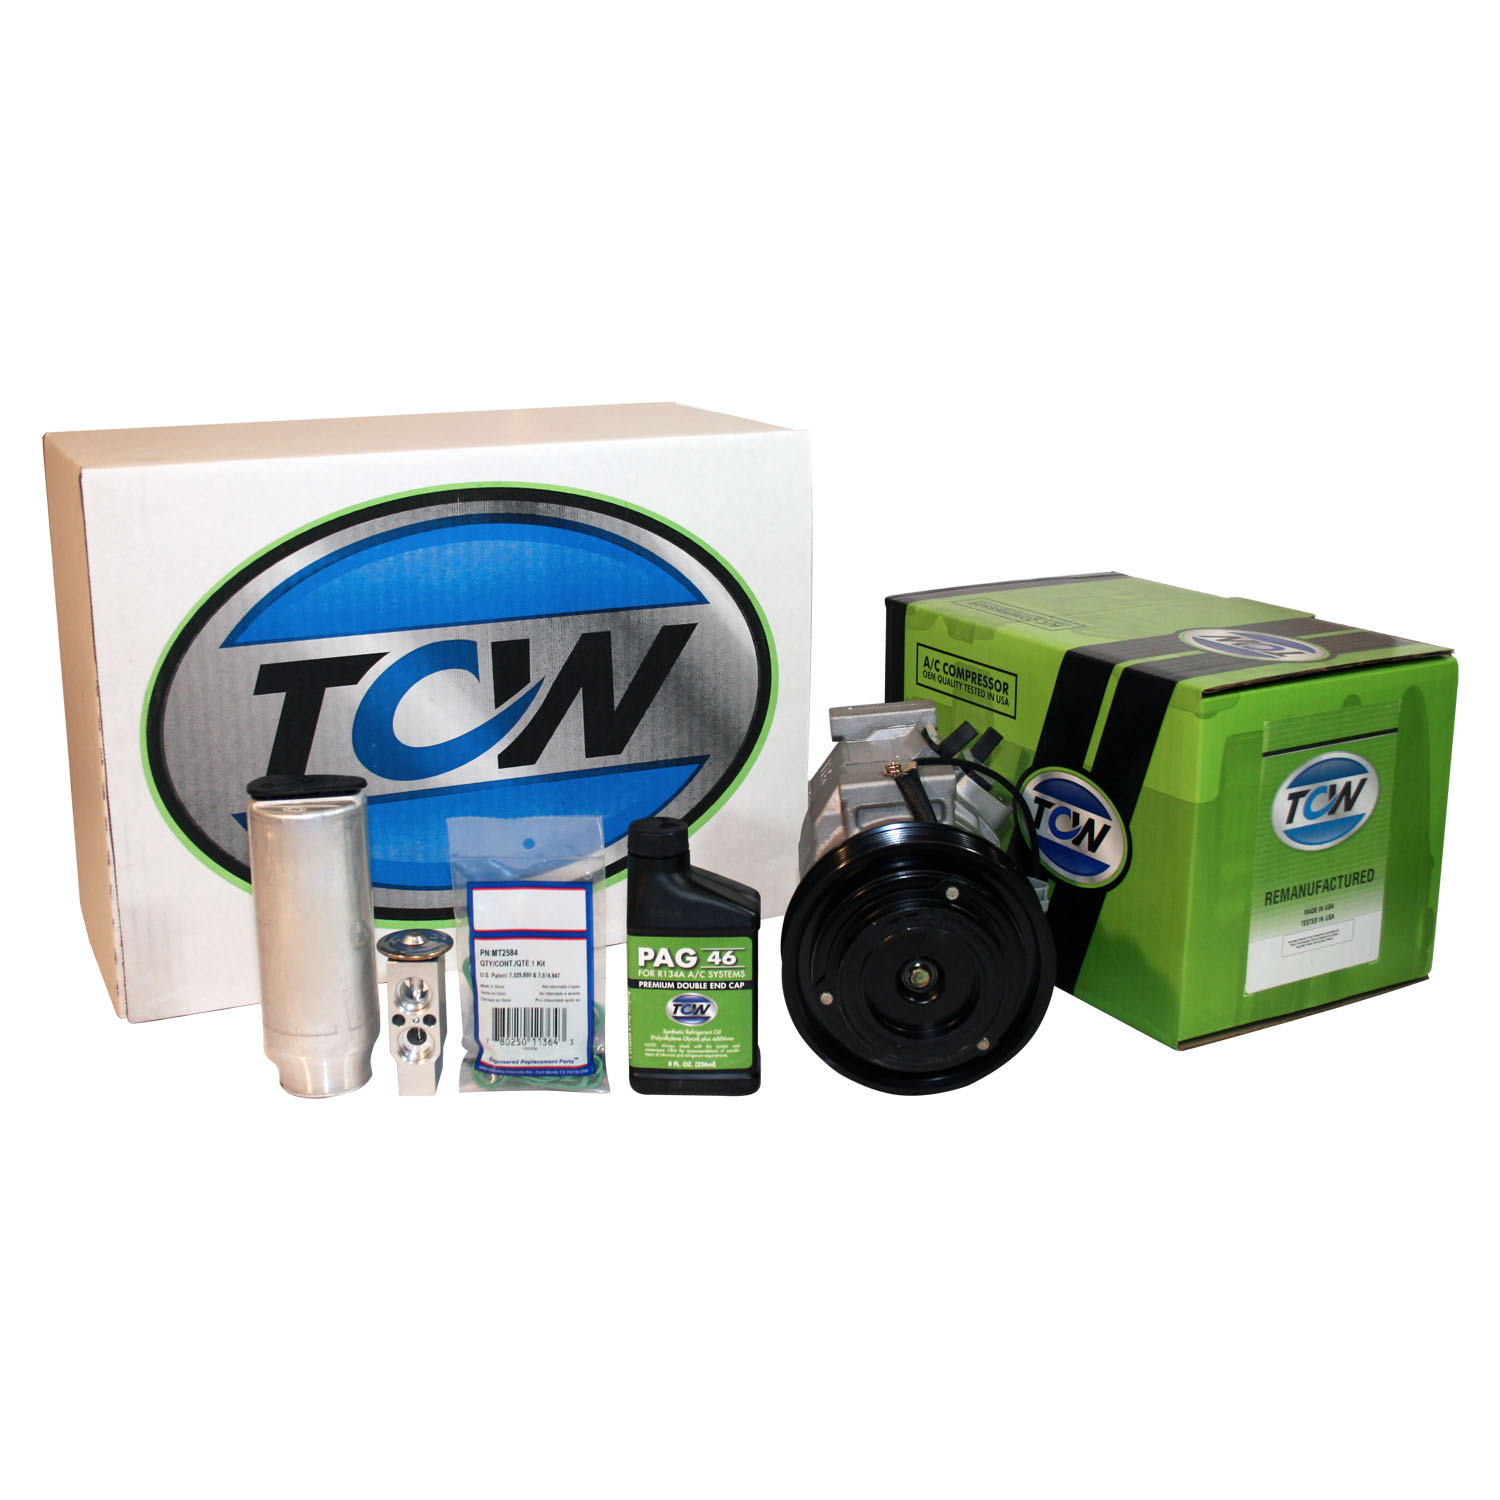 TCW Vehicle A/C Kit K1000389R Remanufactured Product Image field_60b6a13a6e67c